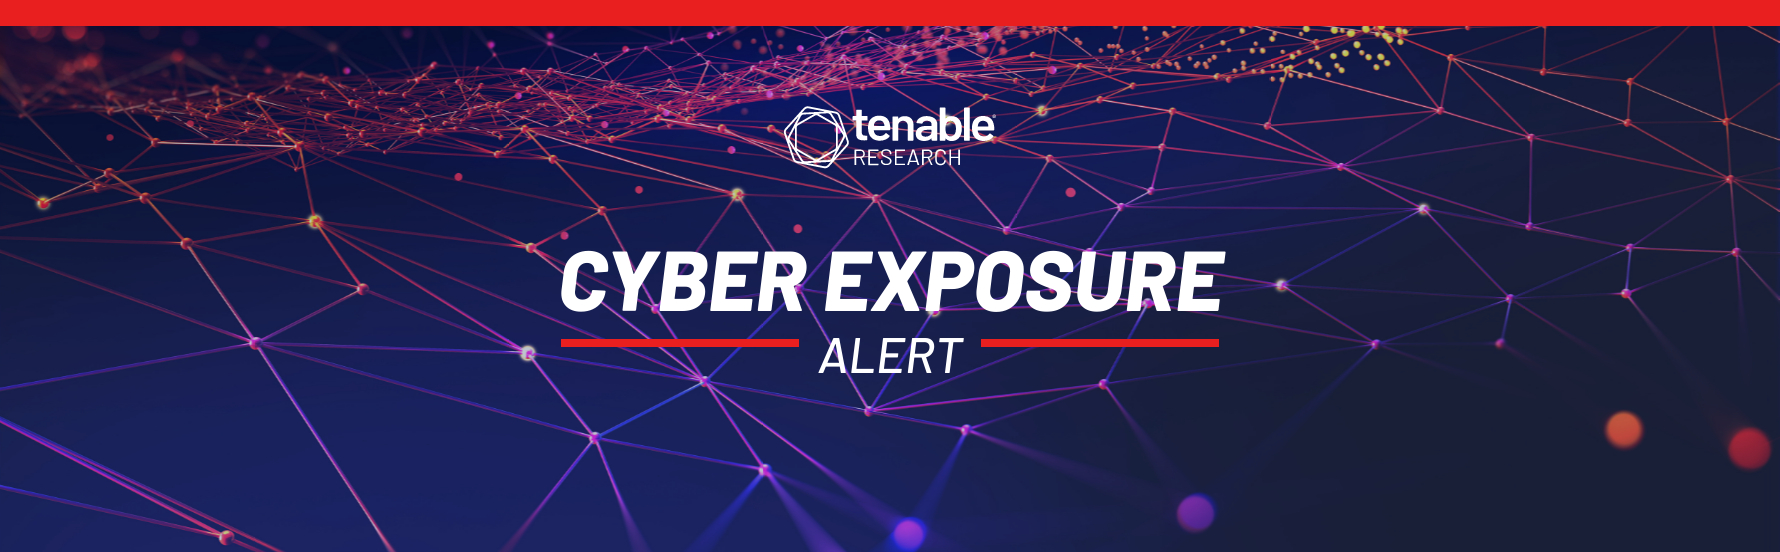 Cyber Exposure Alert: 3CX Desktop App for Windows and macOS Reportedly Compromised in Supply Chain Attack